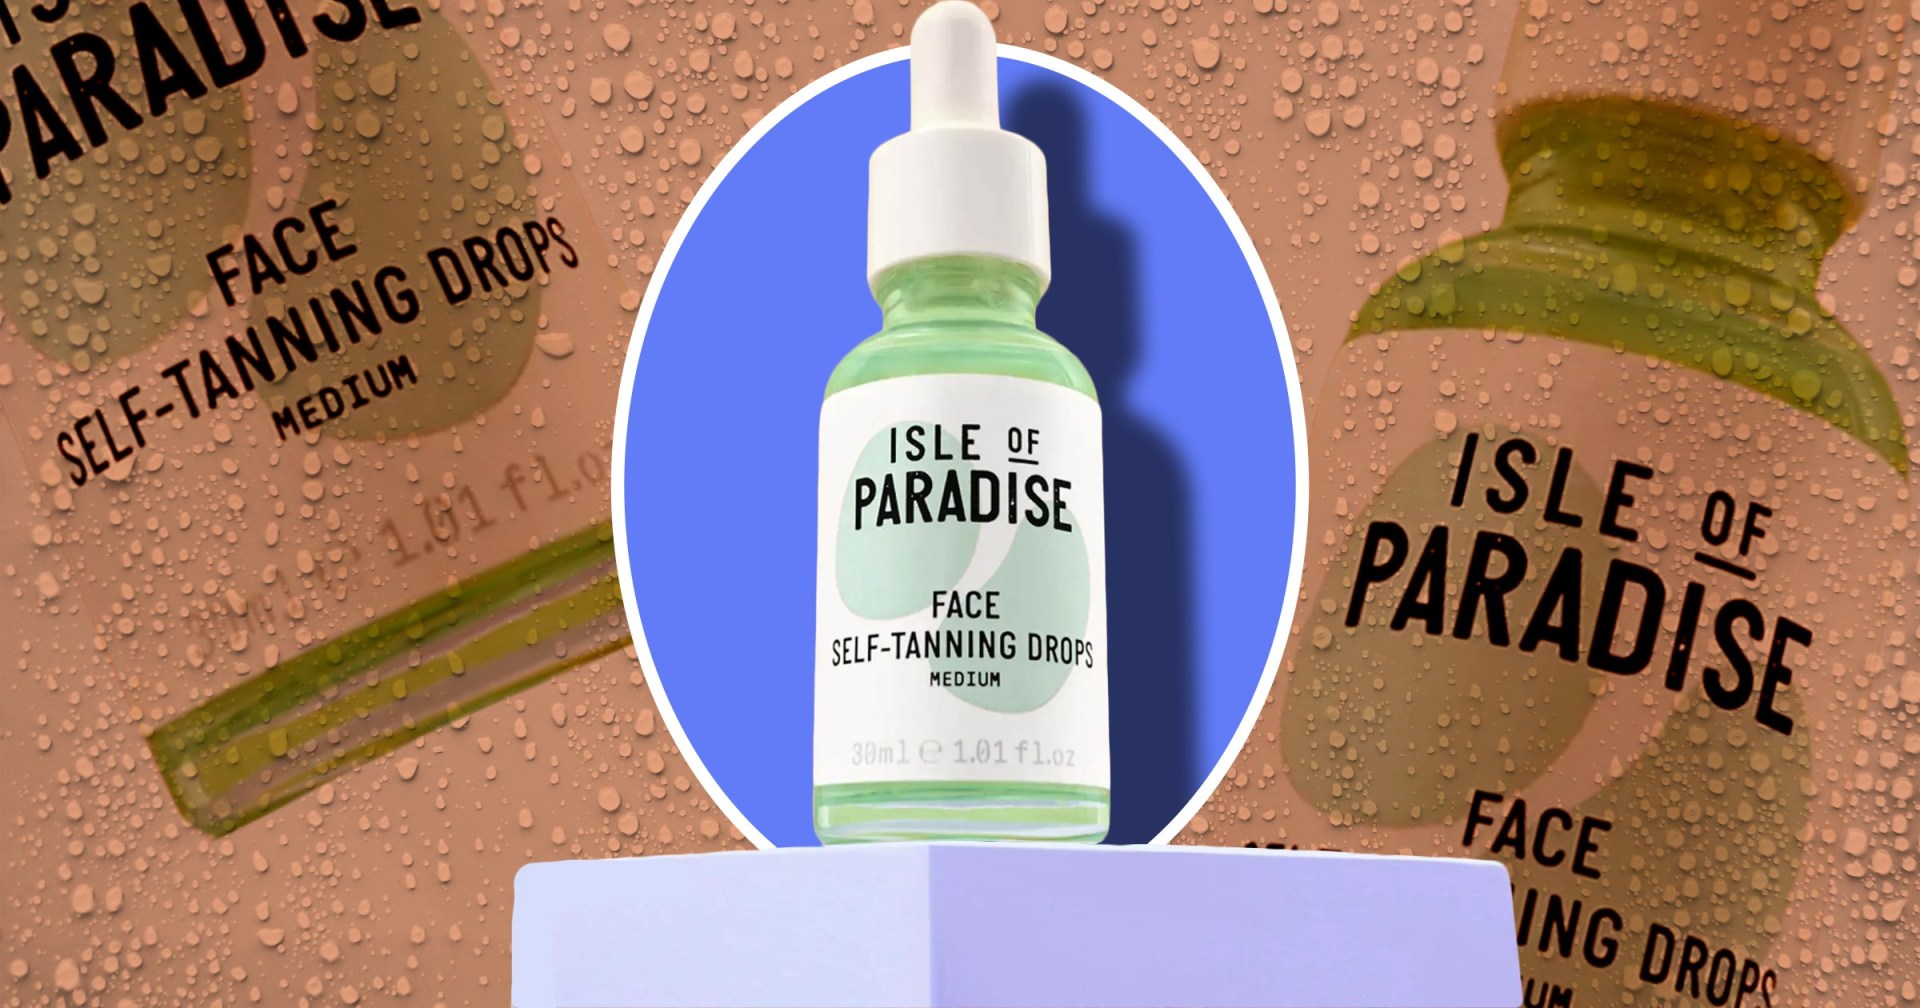 for a limited time only, bag the isle of paradise self-tanning drops for just £10